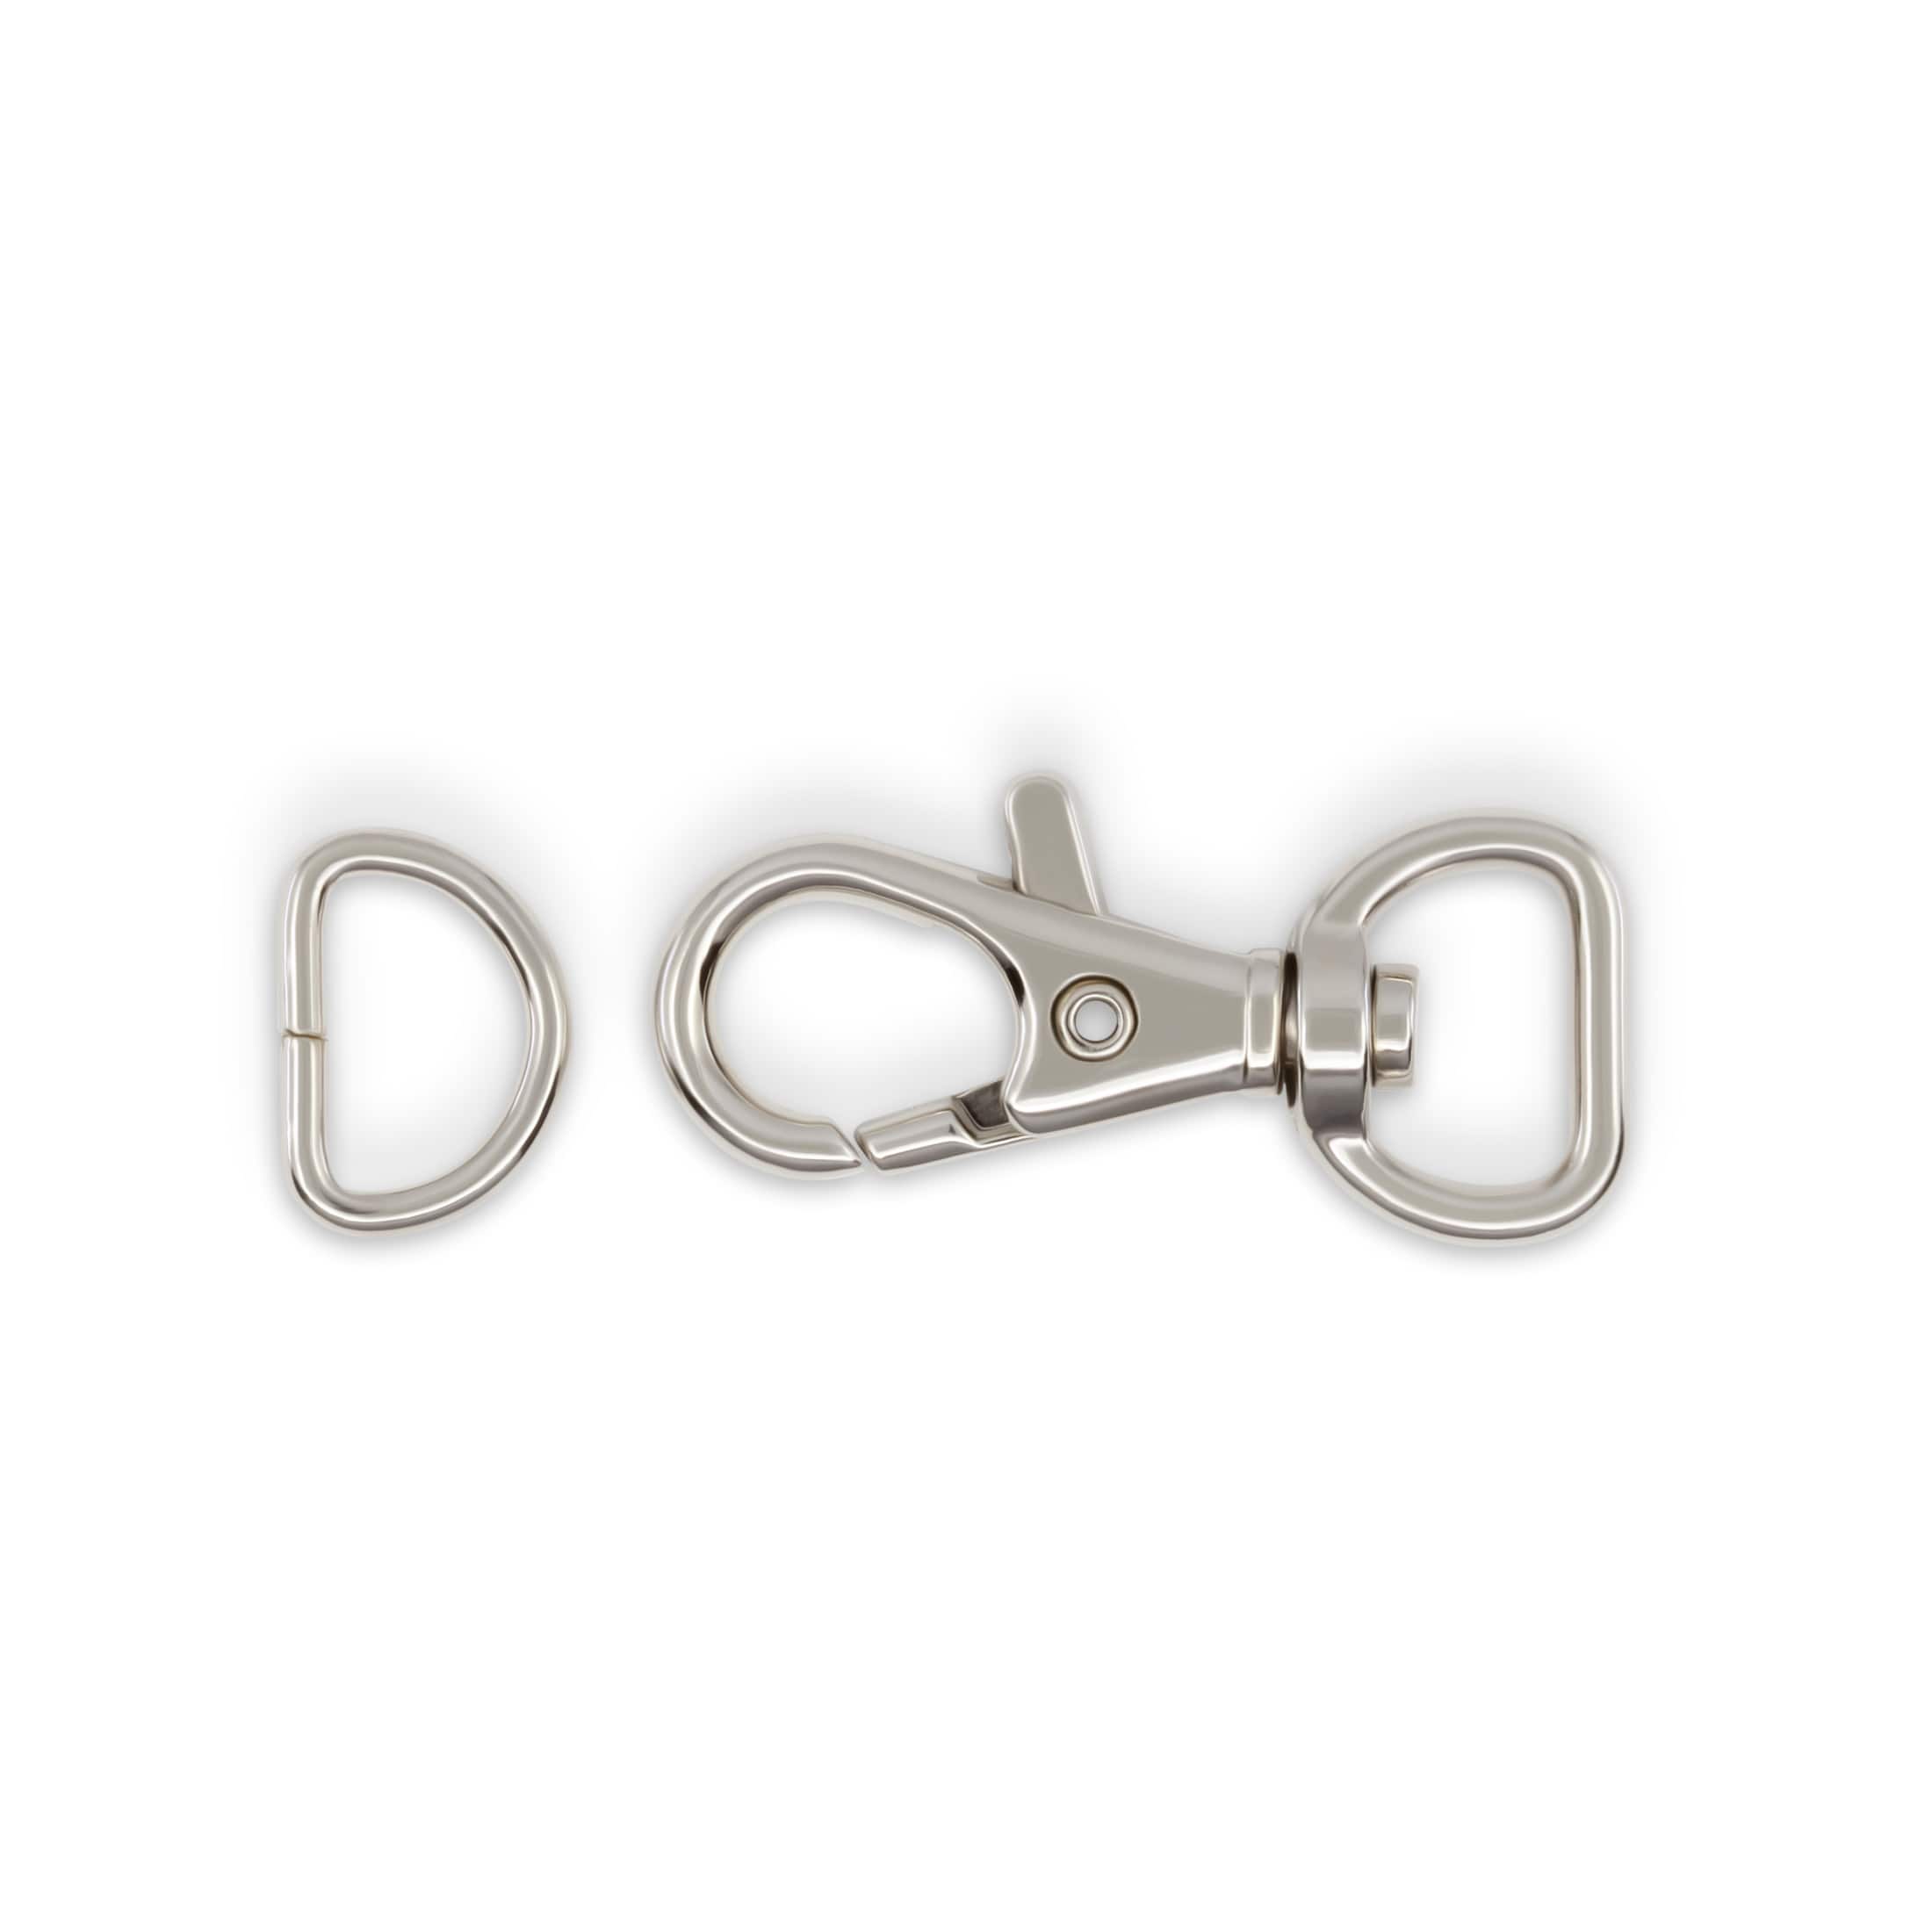 Shop for the Swivel Hook & D-Ring By Loops & Threads® at Michaels